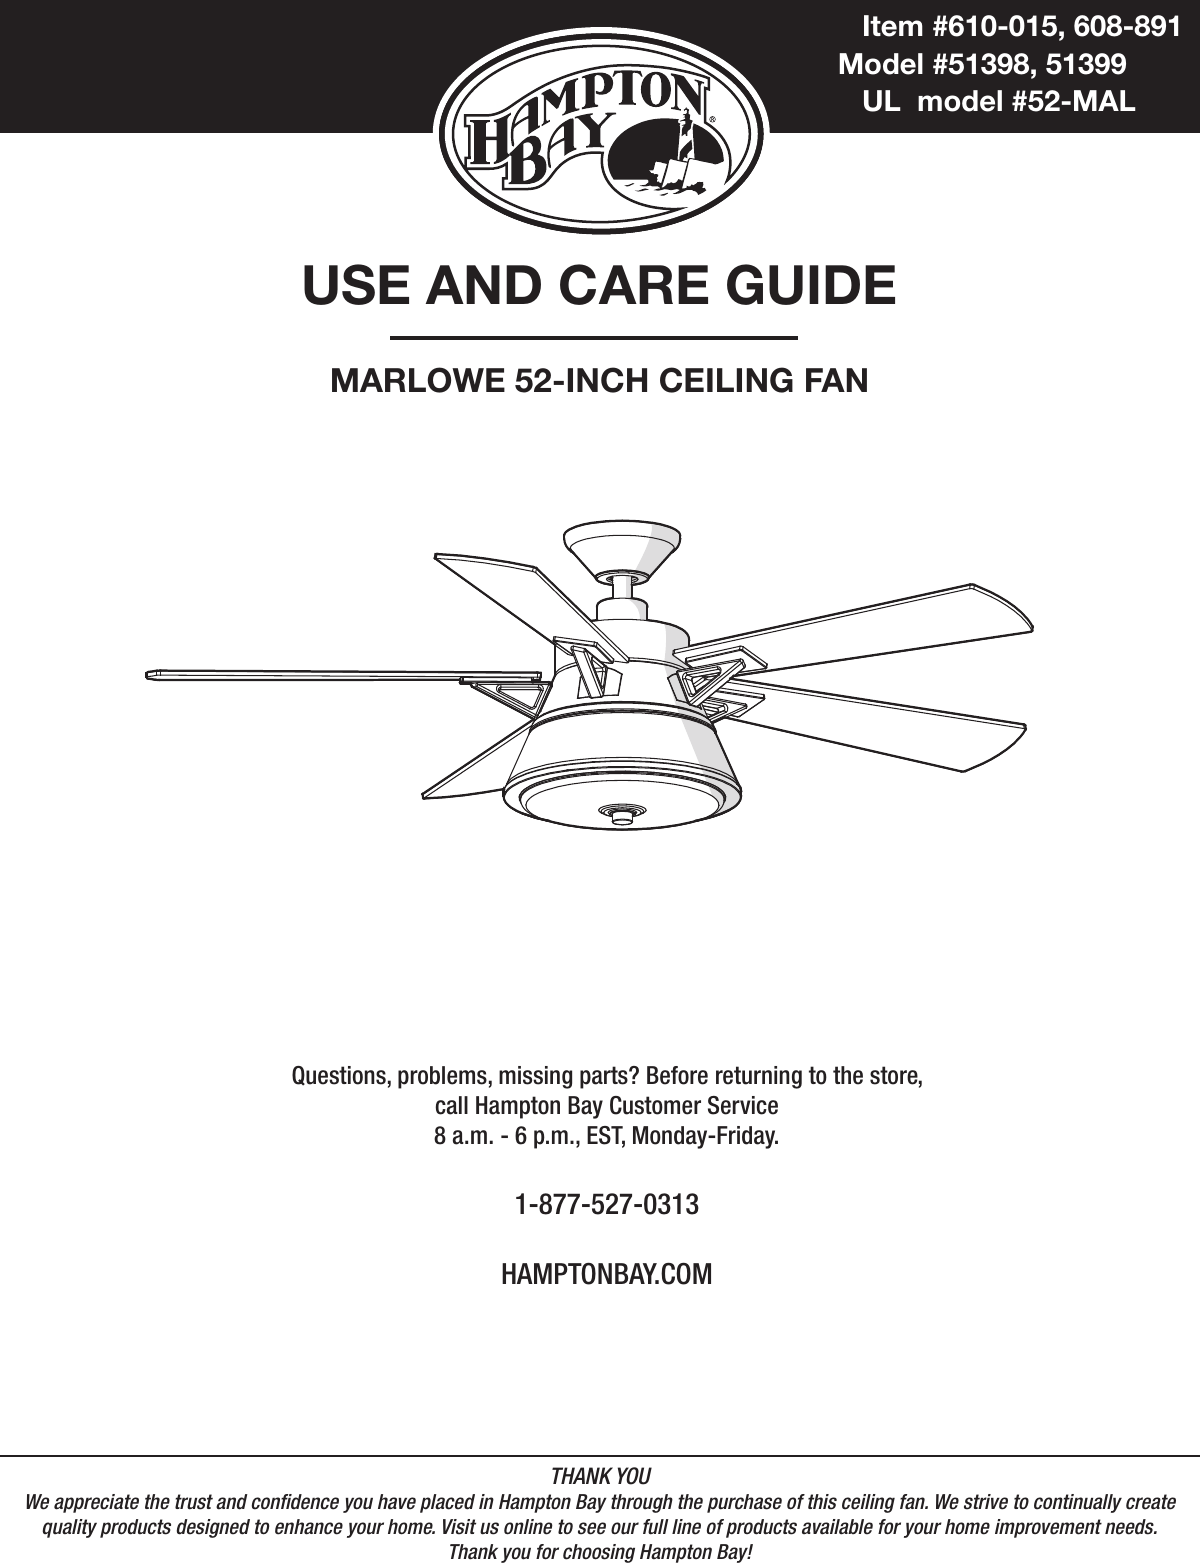 USE AND CARE GUIDEMARLOWE 52-INCH CEILING FANQuestions, problems, missing parts? Before returning to the store,call Hampton Bay Customer Service8 a.m. - 6 p.m., EST, Monday-Friday.1-877-527-0313HAMPTONBAY.COMTHANK YOUWe appreciate the trust and condence you have placed in Hampton Bay through the purchase of this ceiling fan. We strive to continually createquality products designed to enhance your home. Visit us online to see our full line of products available for your home improvement needs. Thank you for choosing Hampton Bay!           Item #610-015, 608-891          Model #51398, 51399            UL  model #52-MAL